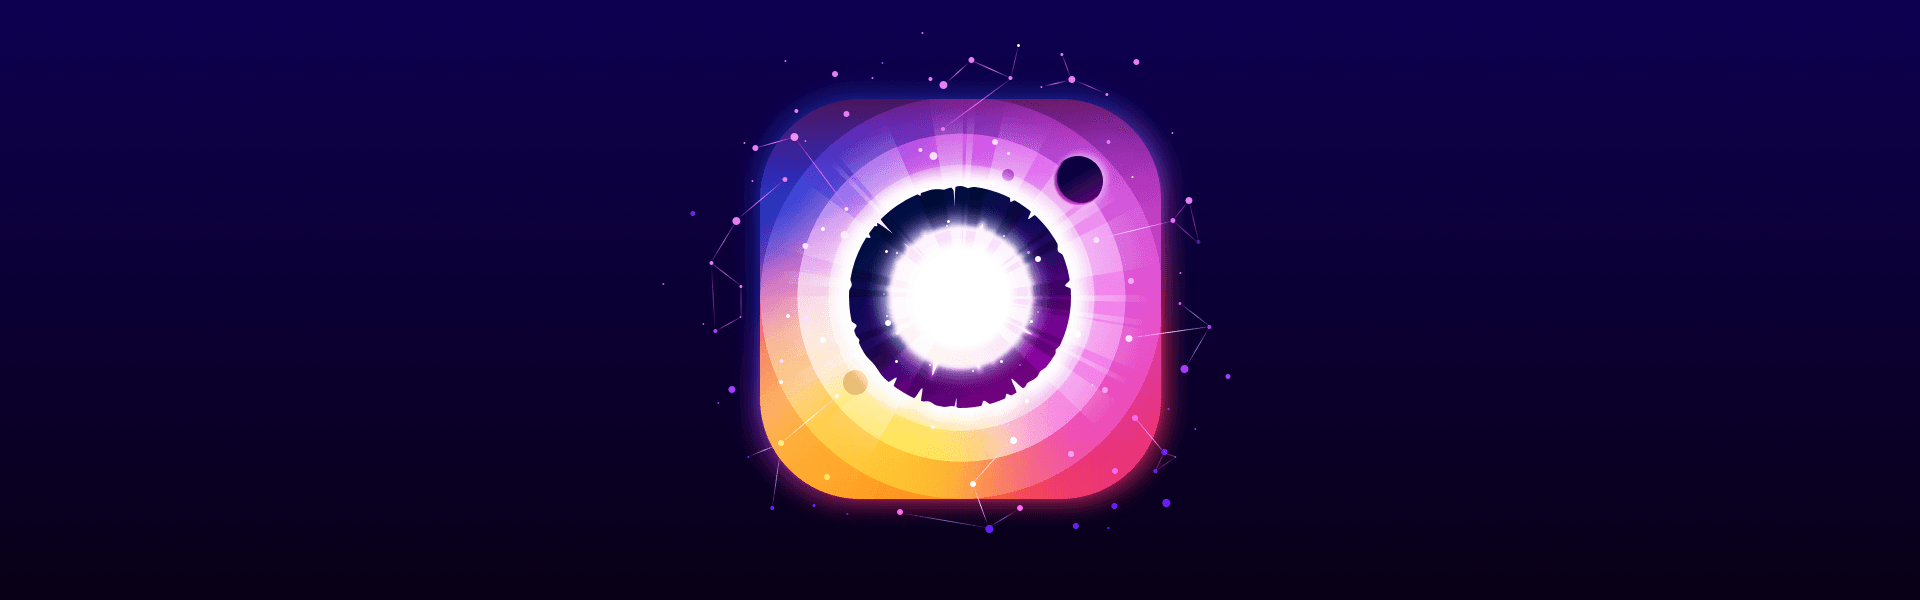 How to create a social media app - illustration by Andrey Prokopenko